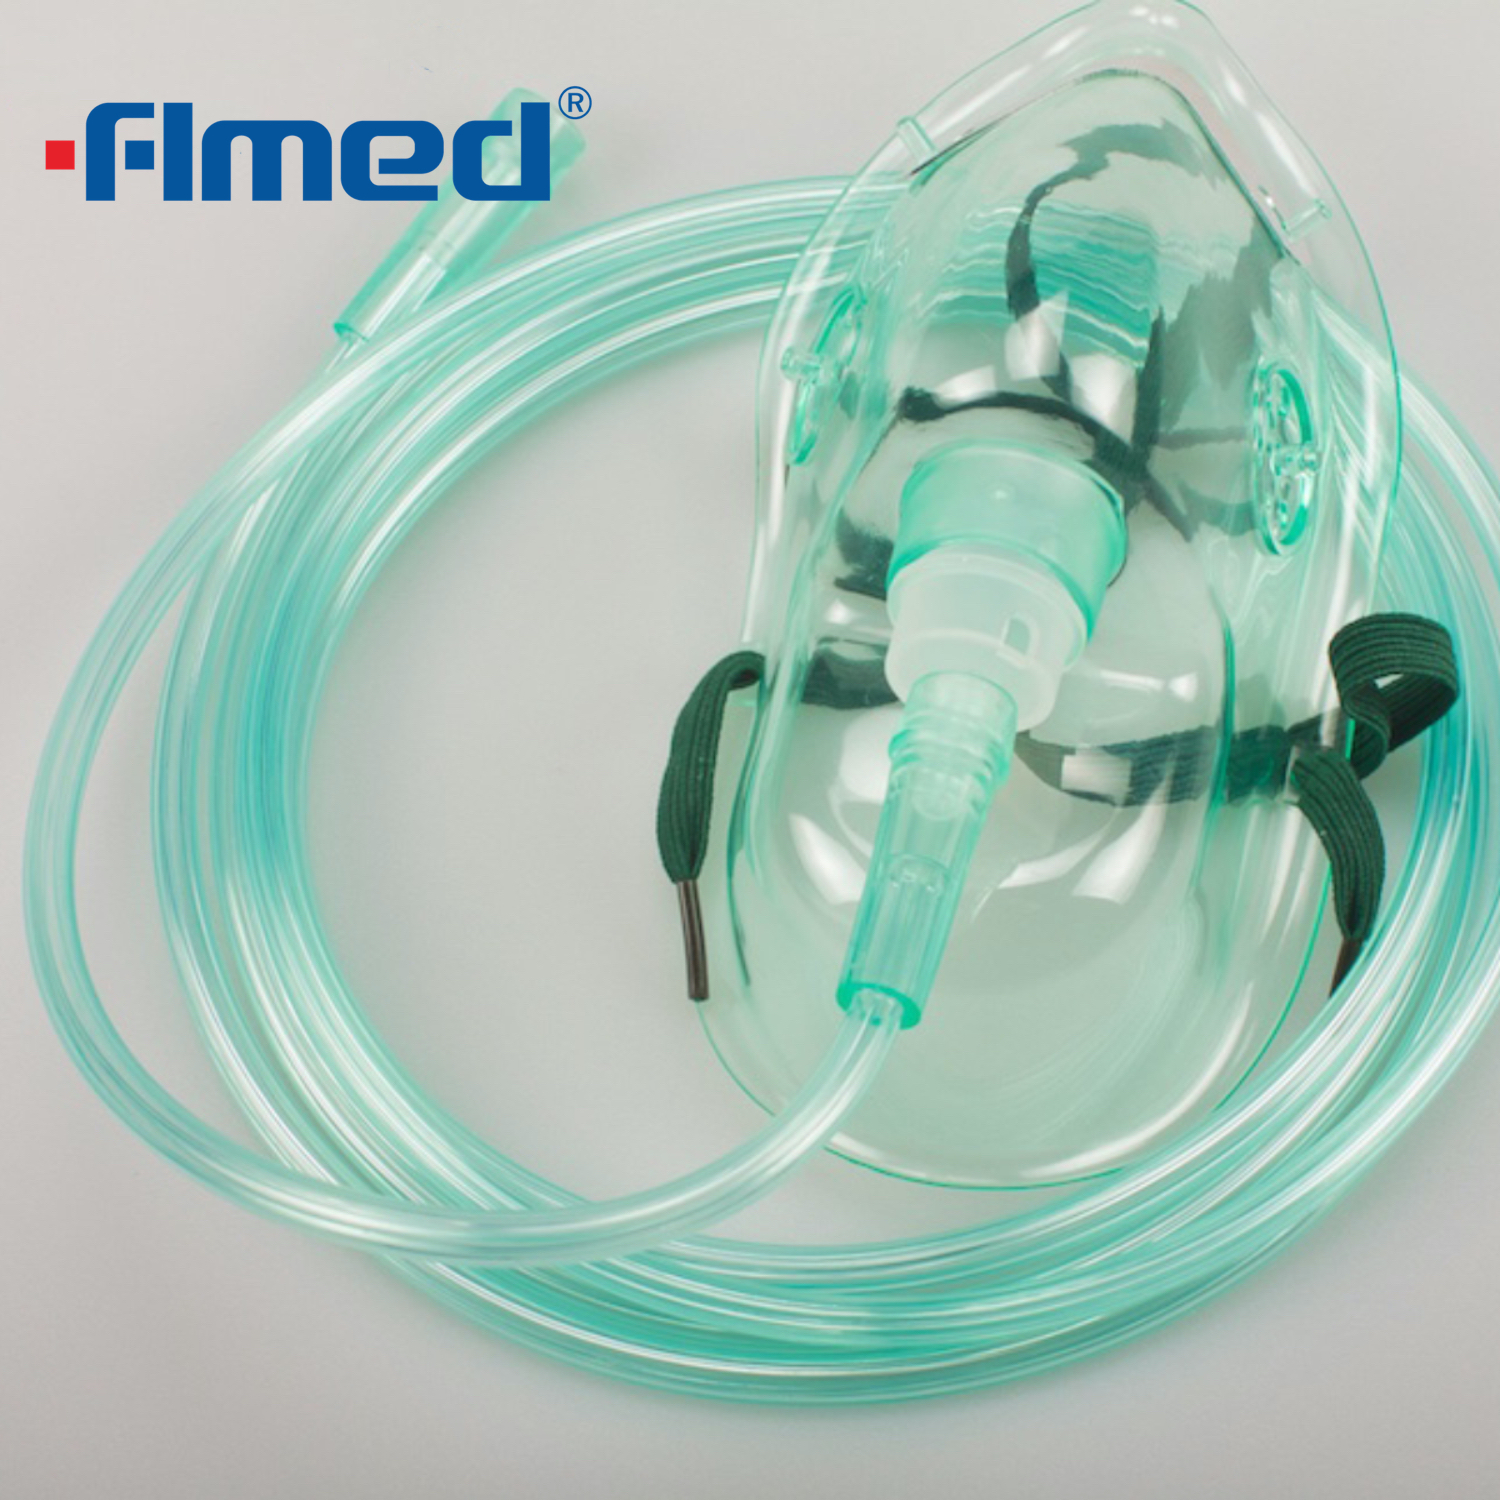 OXYGEN MASK - ADULT ELONGATED WITH 210CM TUBING